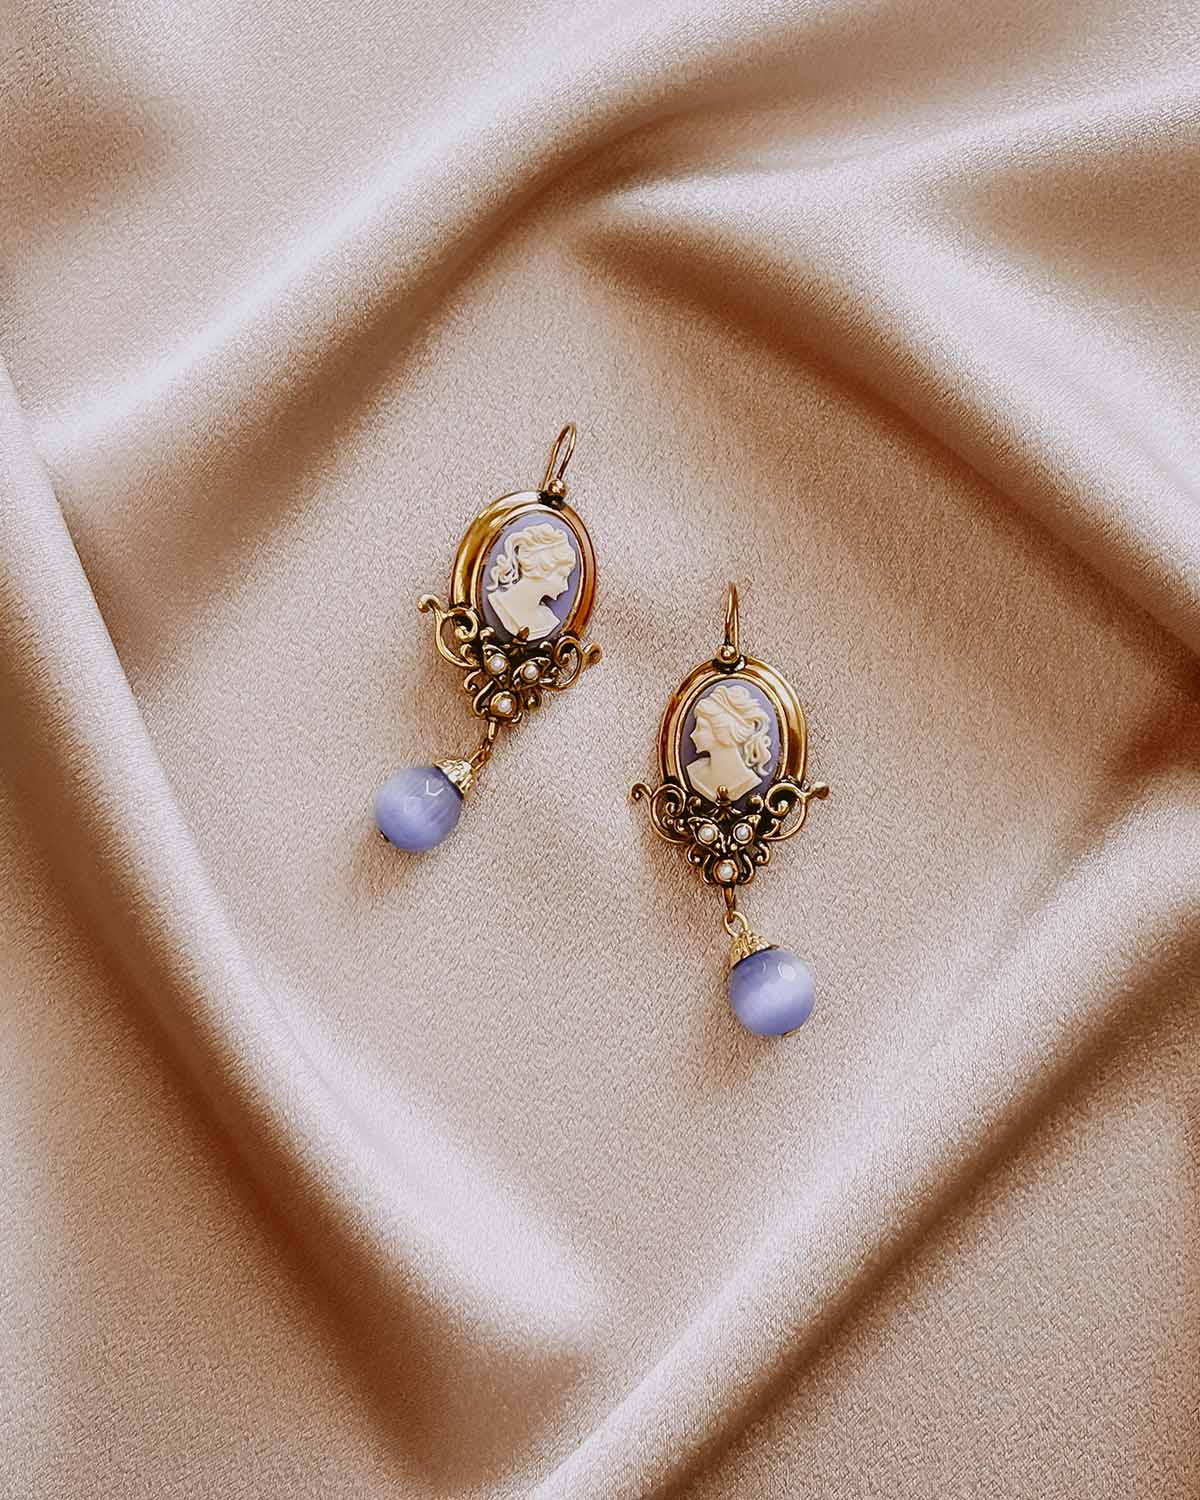 The Ponte Vecchio Earrings (Tuscan Glimmer Edition)